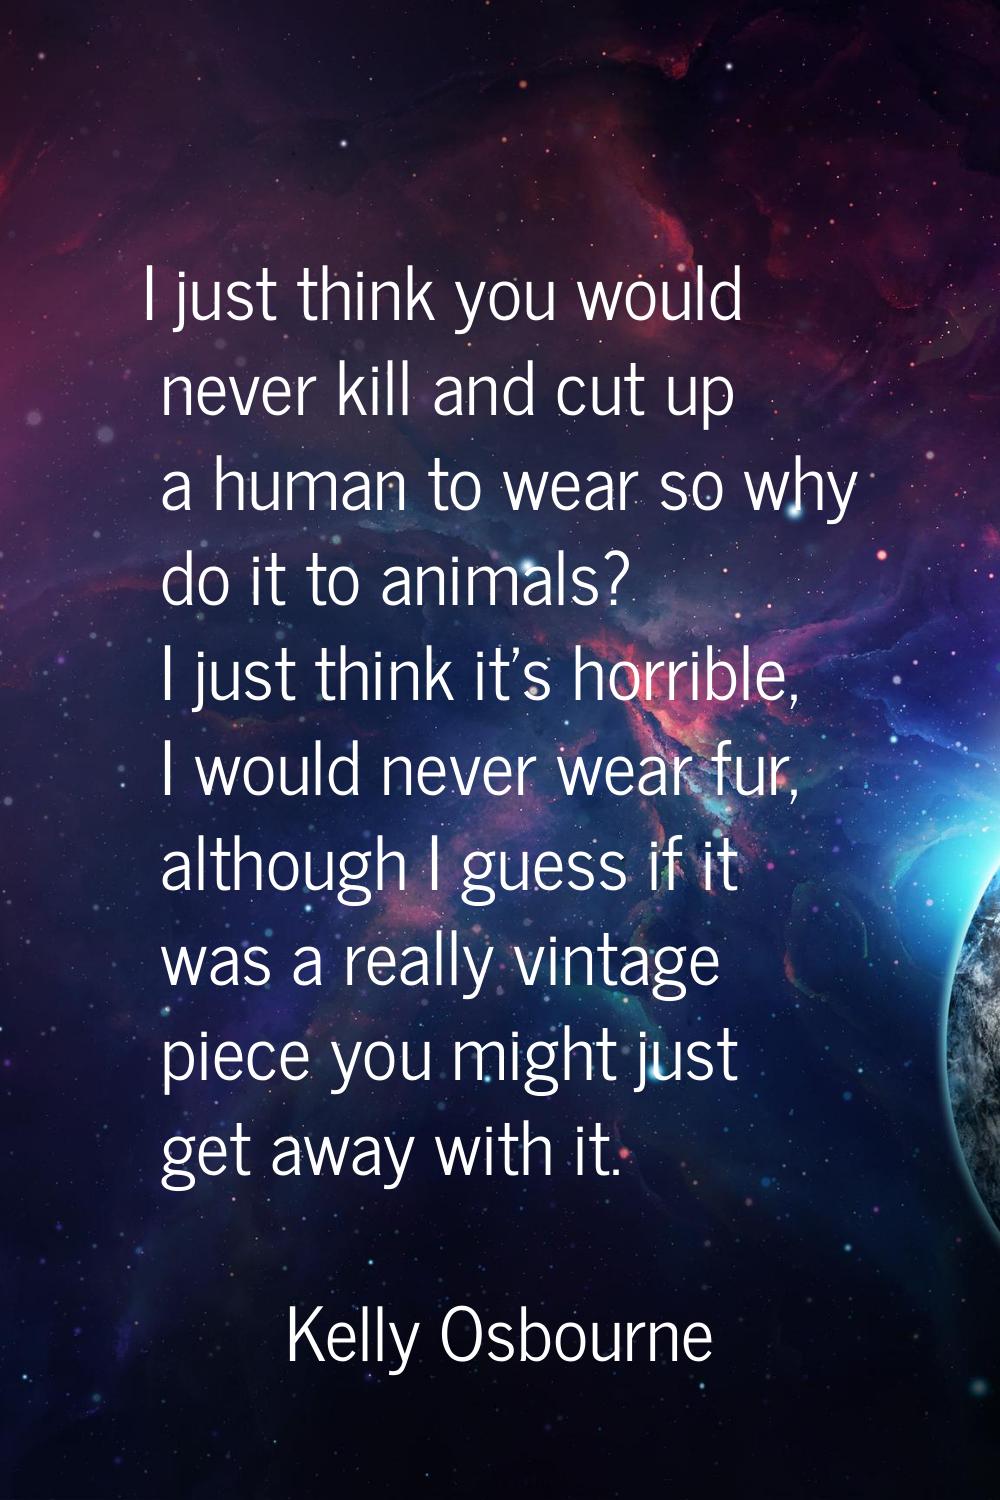 I just think you would never kill and cut up a human to wear so why do it to animals? I just think 